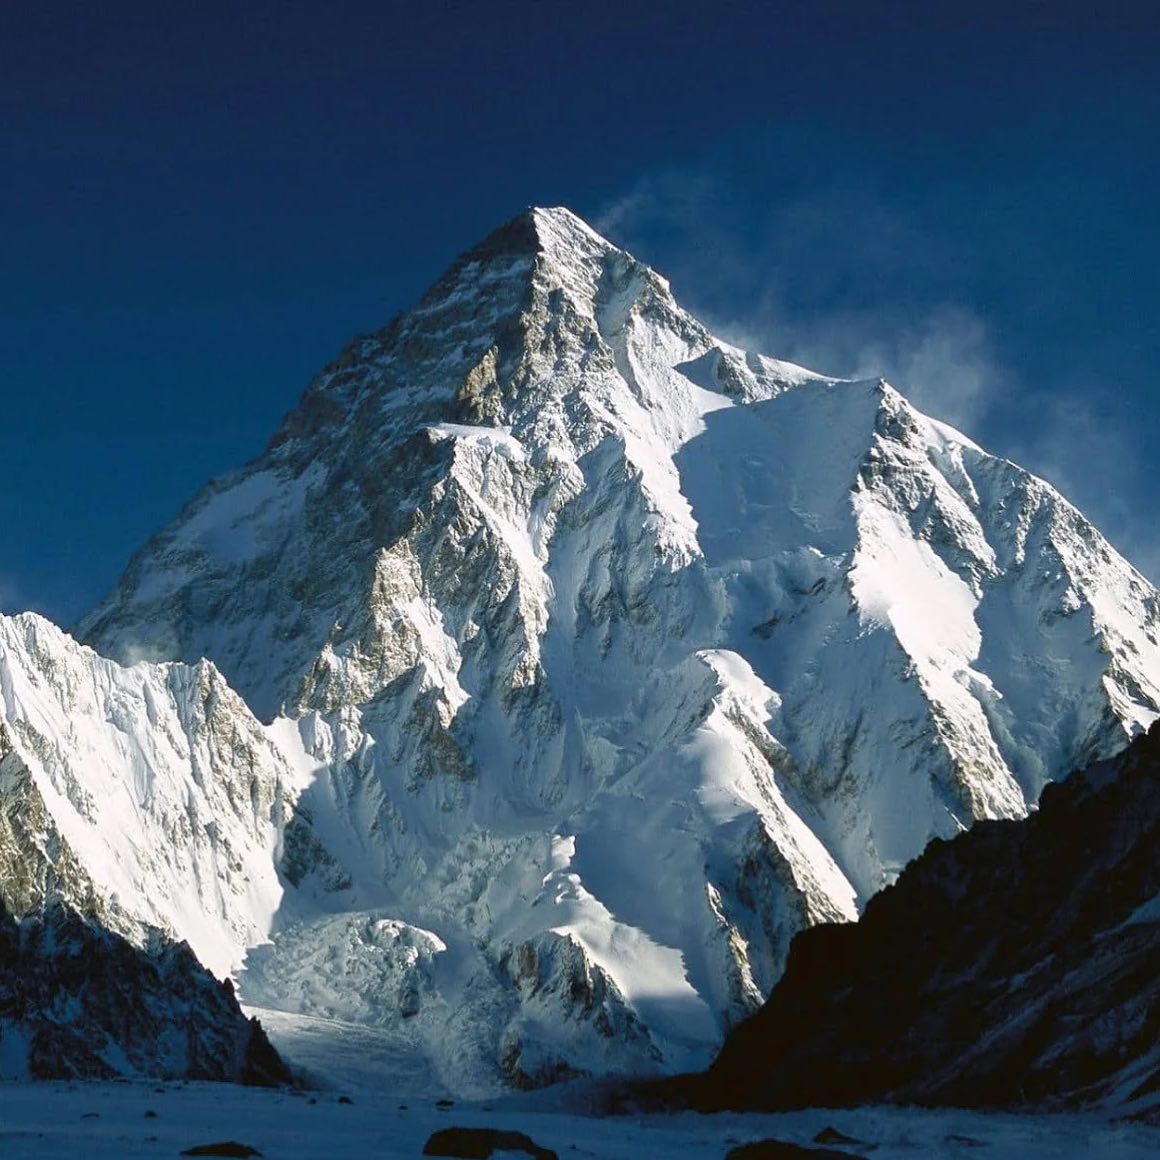 K2 Winter Expedition 2020-21